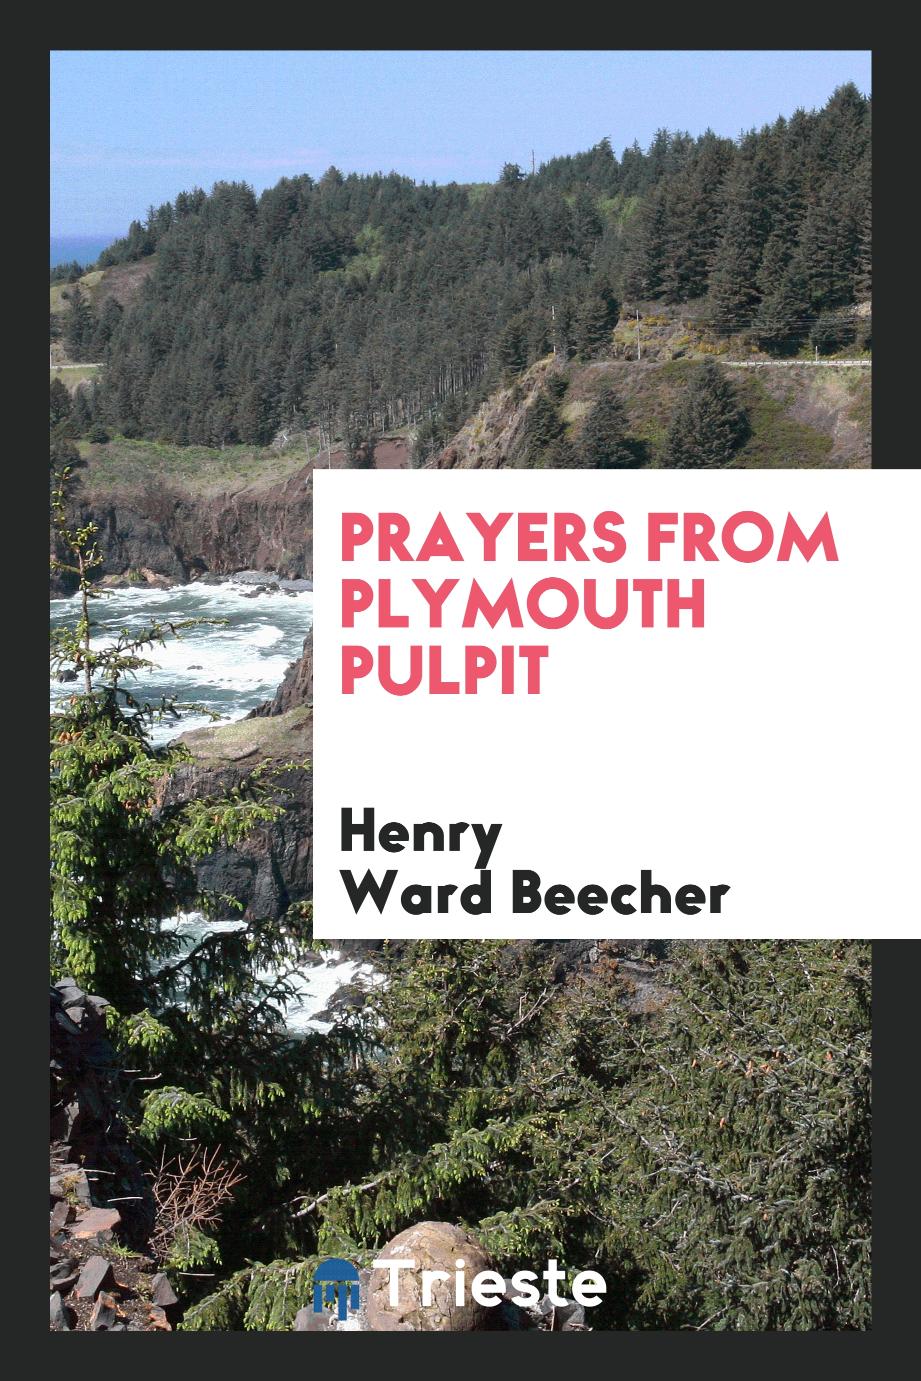 Henry Ward Beecher - Prayers from Plymouth Pulpit